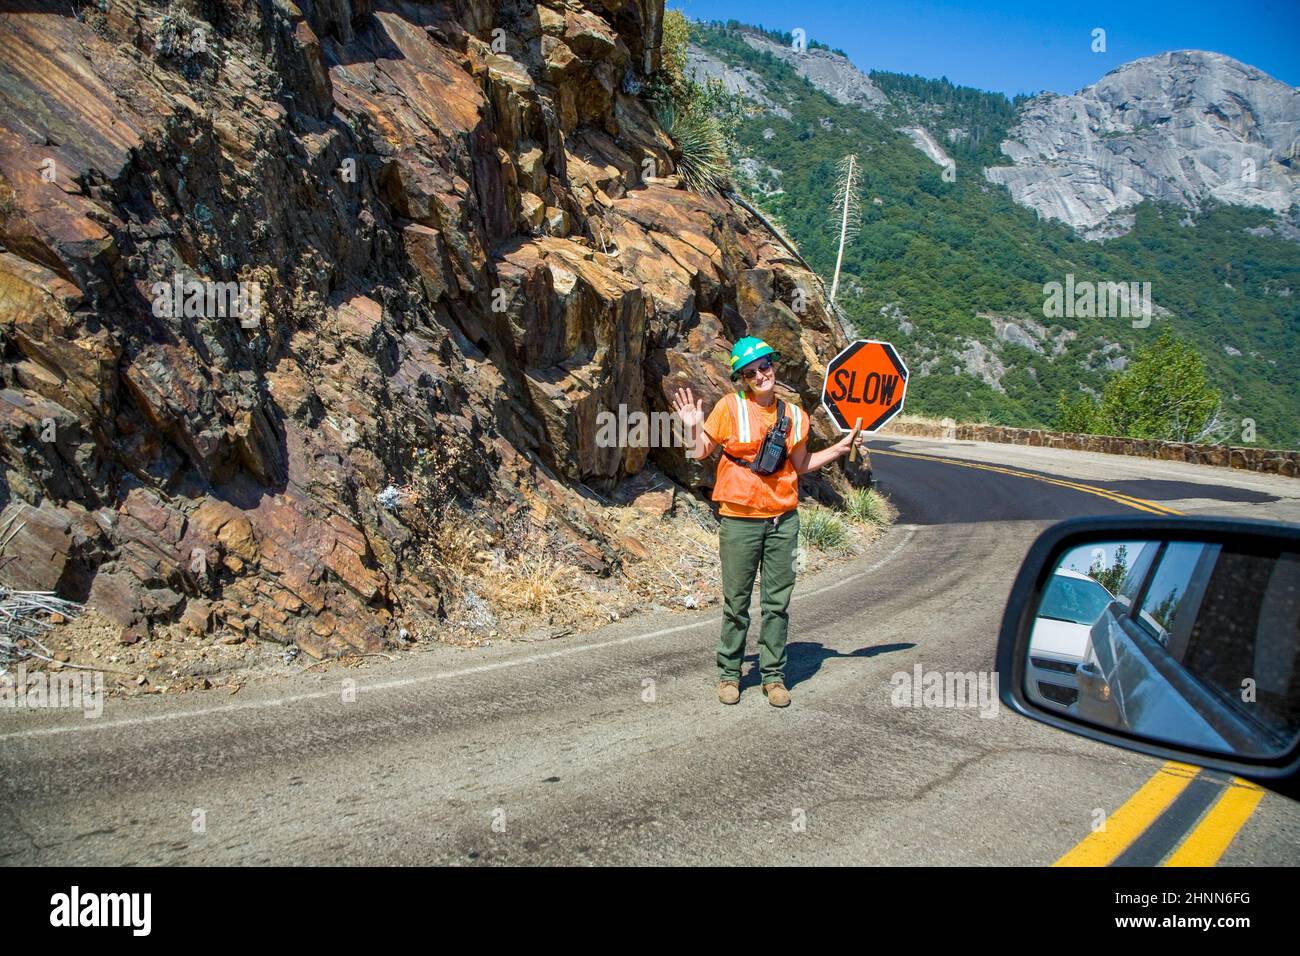 woman regulates the traffic at a road construction site with slow signage. Stock Photo